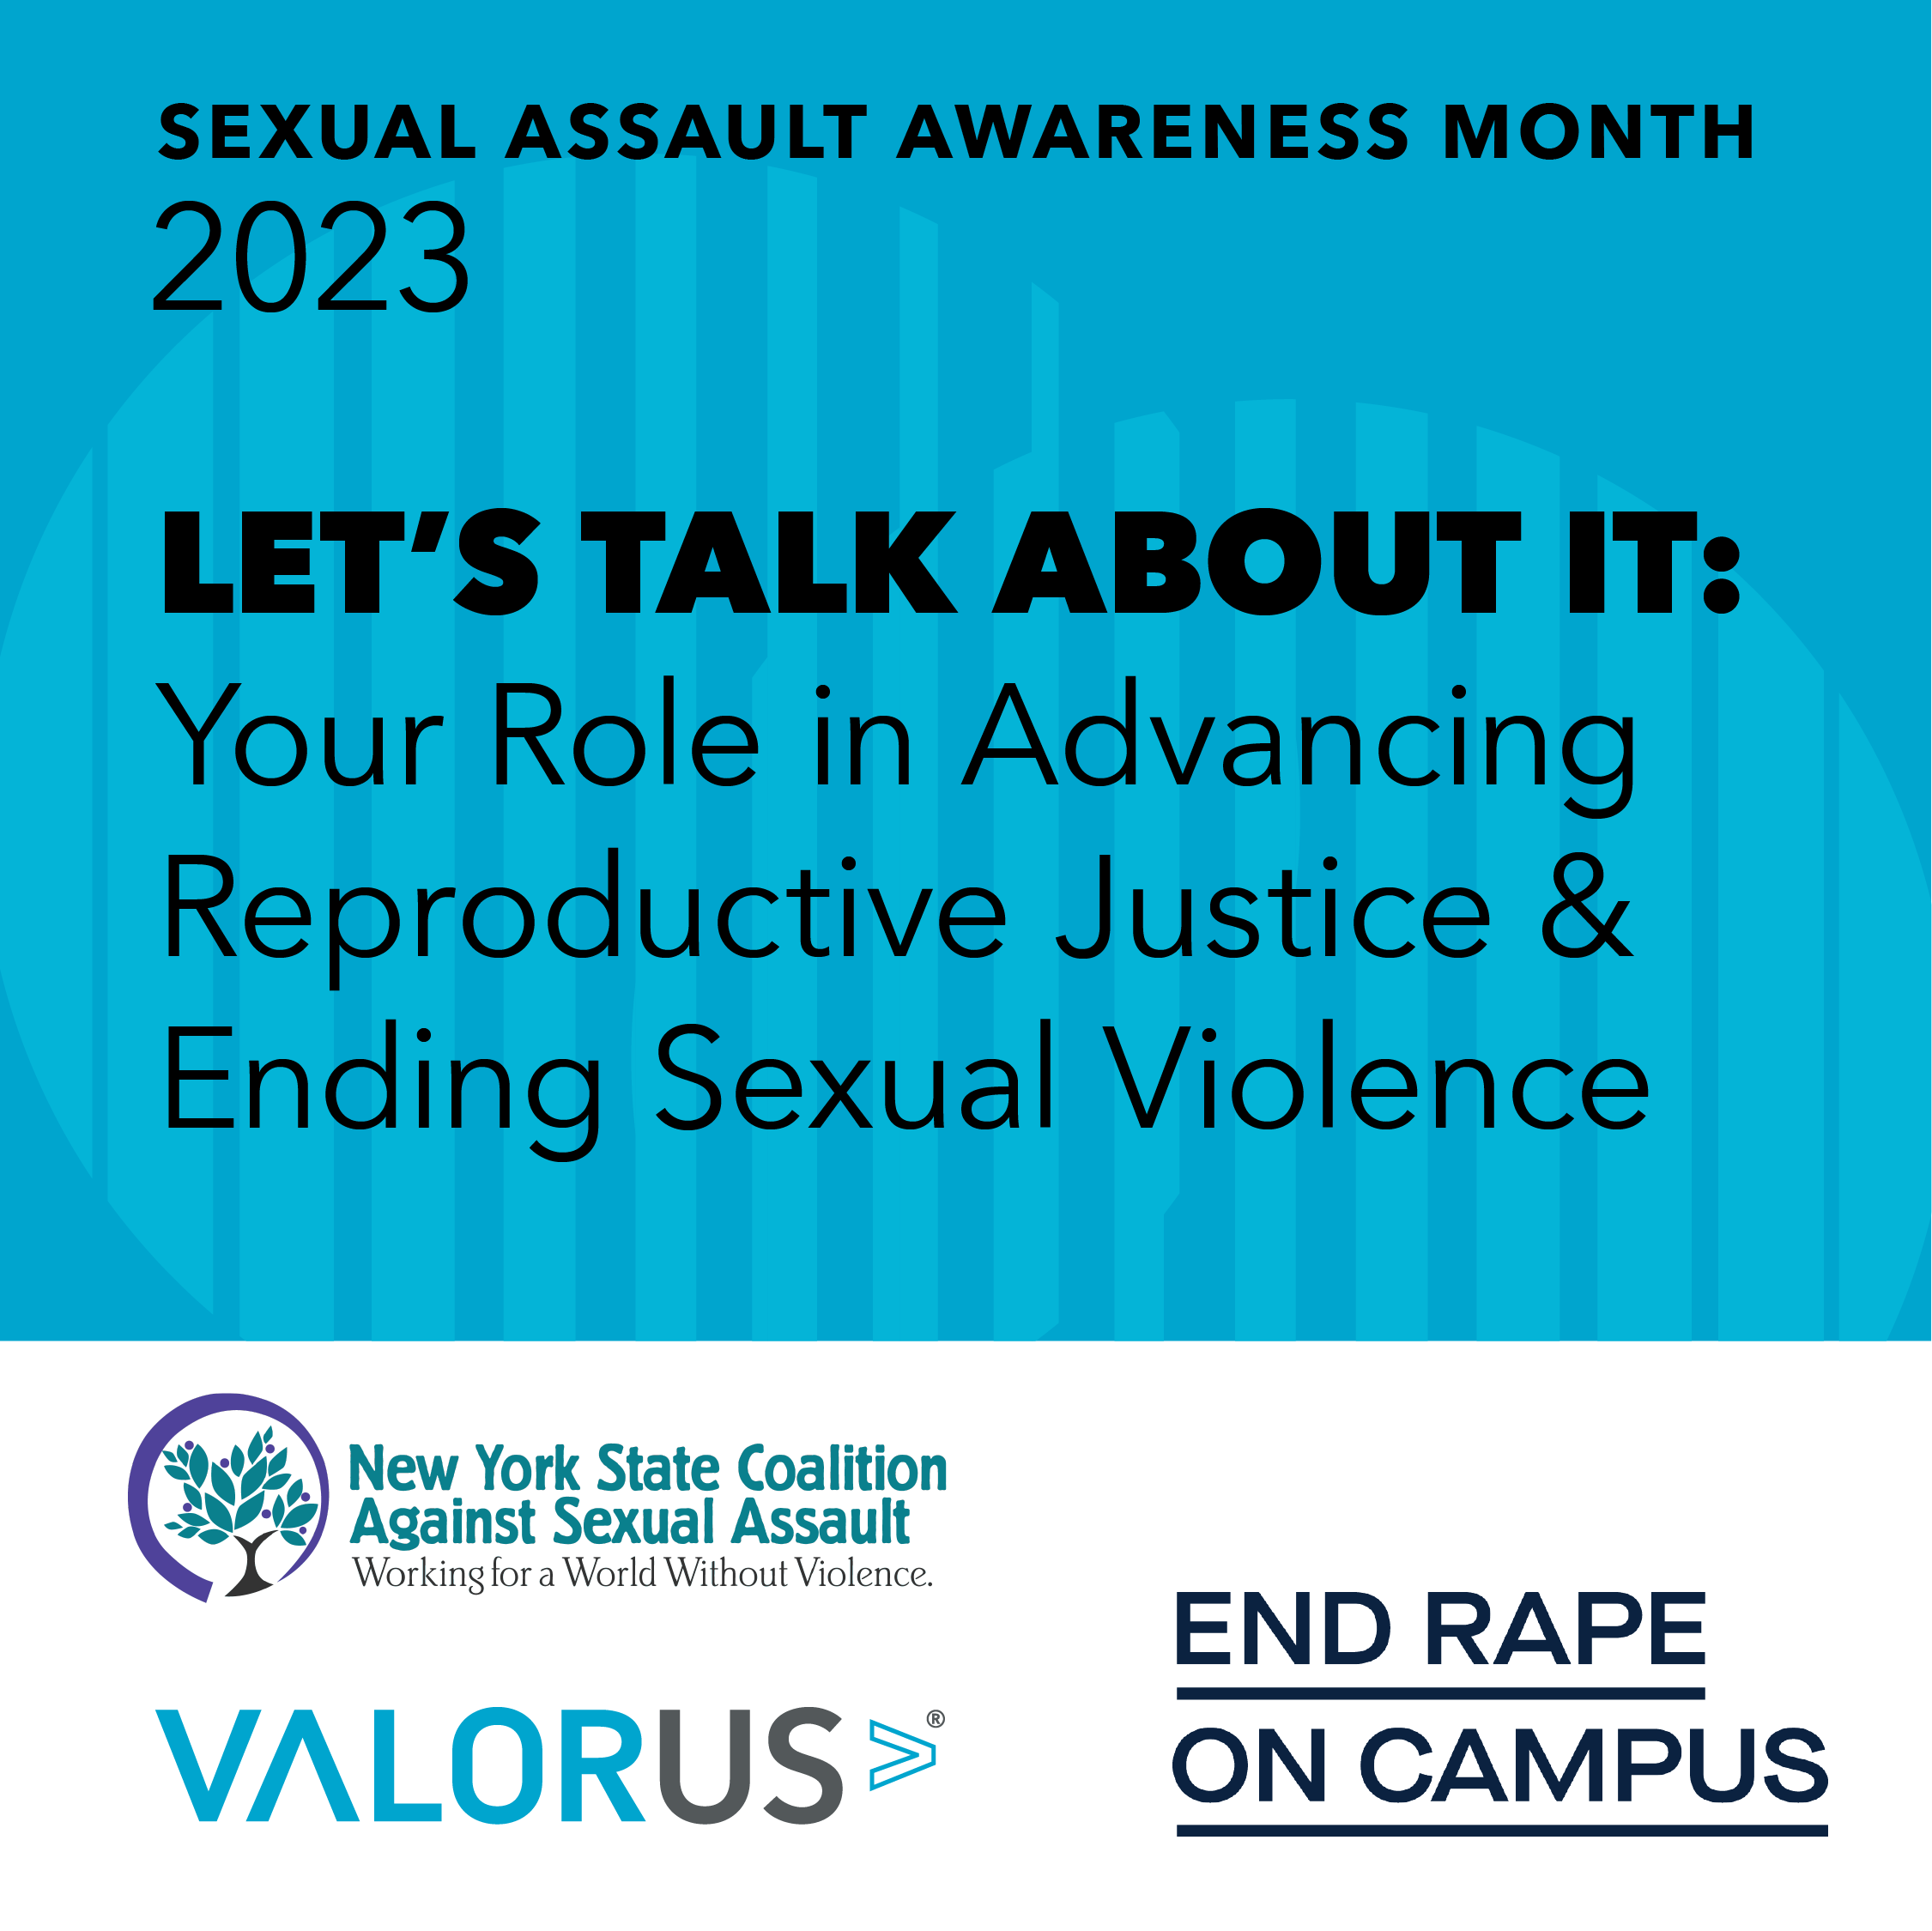 Sexual assault awareness month 2023. Let's talk about it: your role in advancing reproductive justice and ending sexual violence. NYSCASA logo, EROC logo, and VALOR logo.